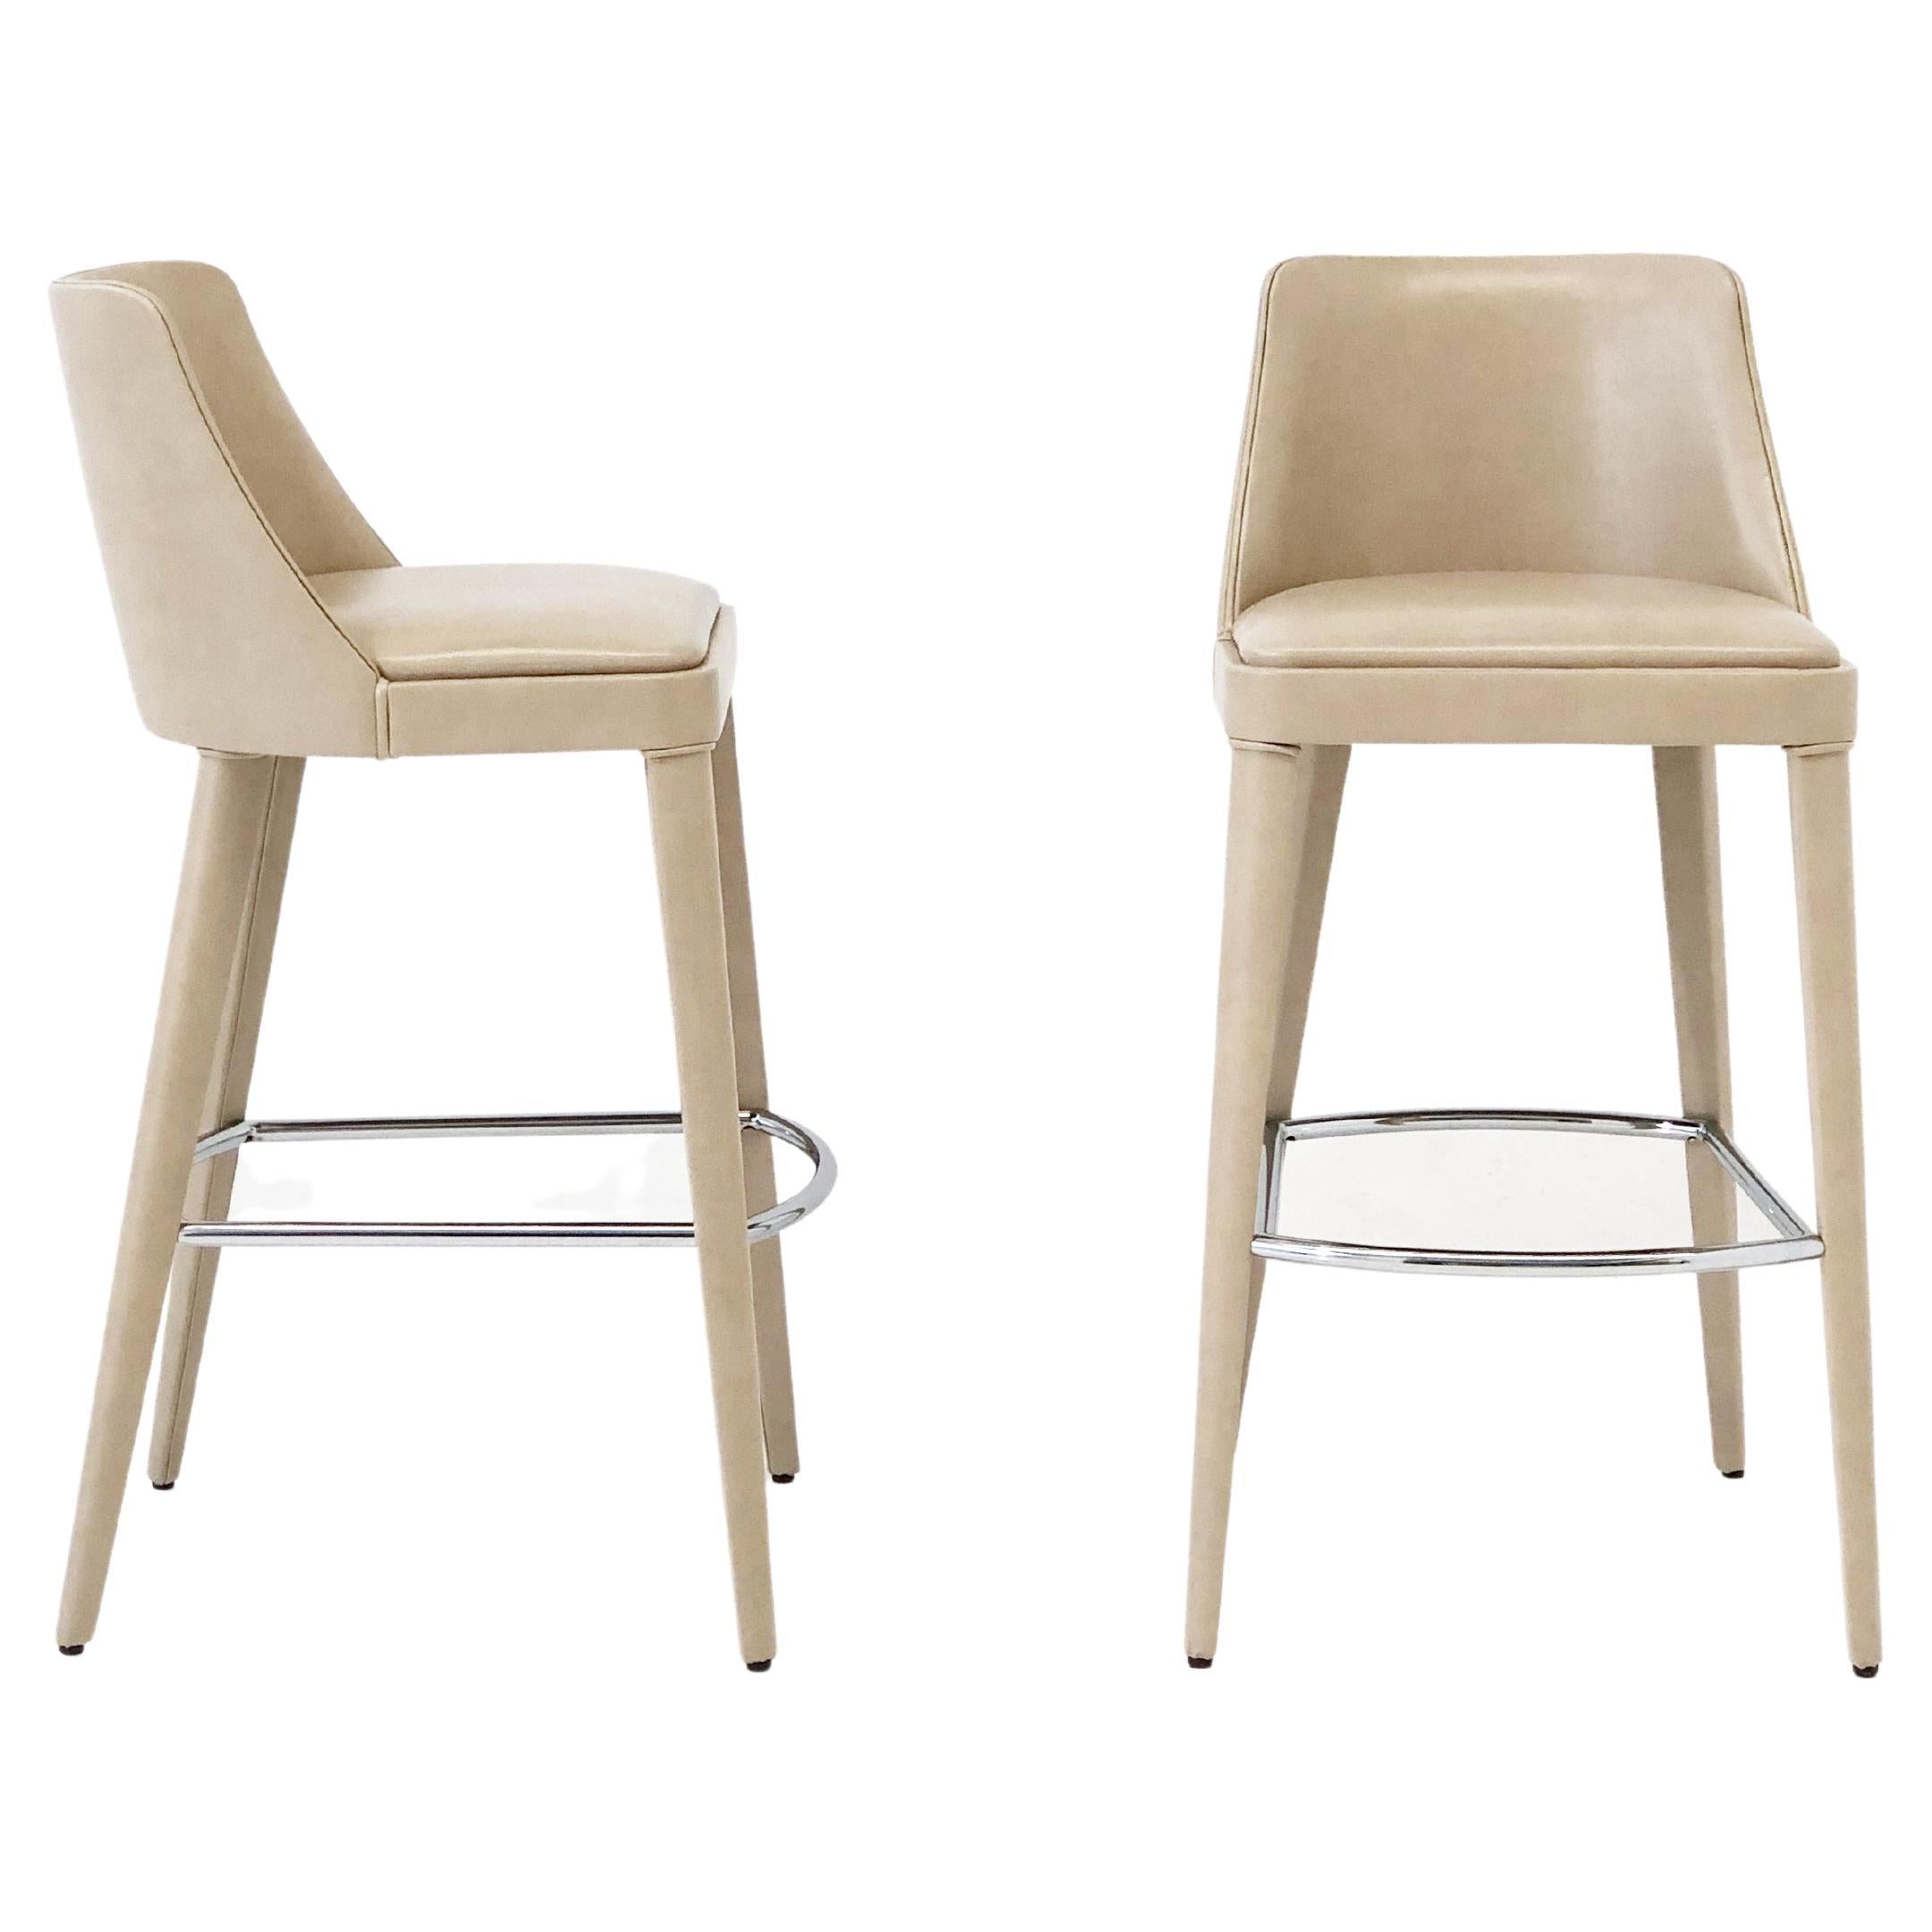 Lola, the Super Comfortable Stool in leather